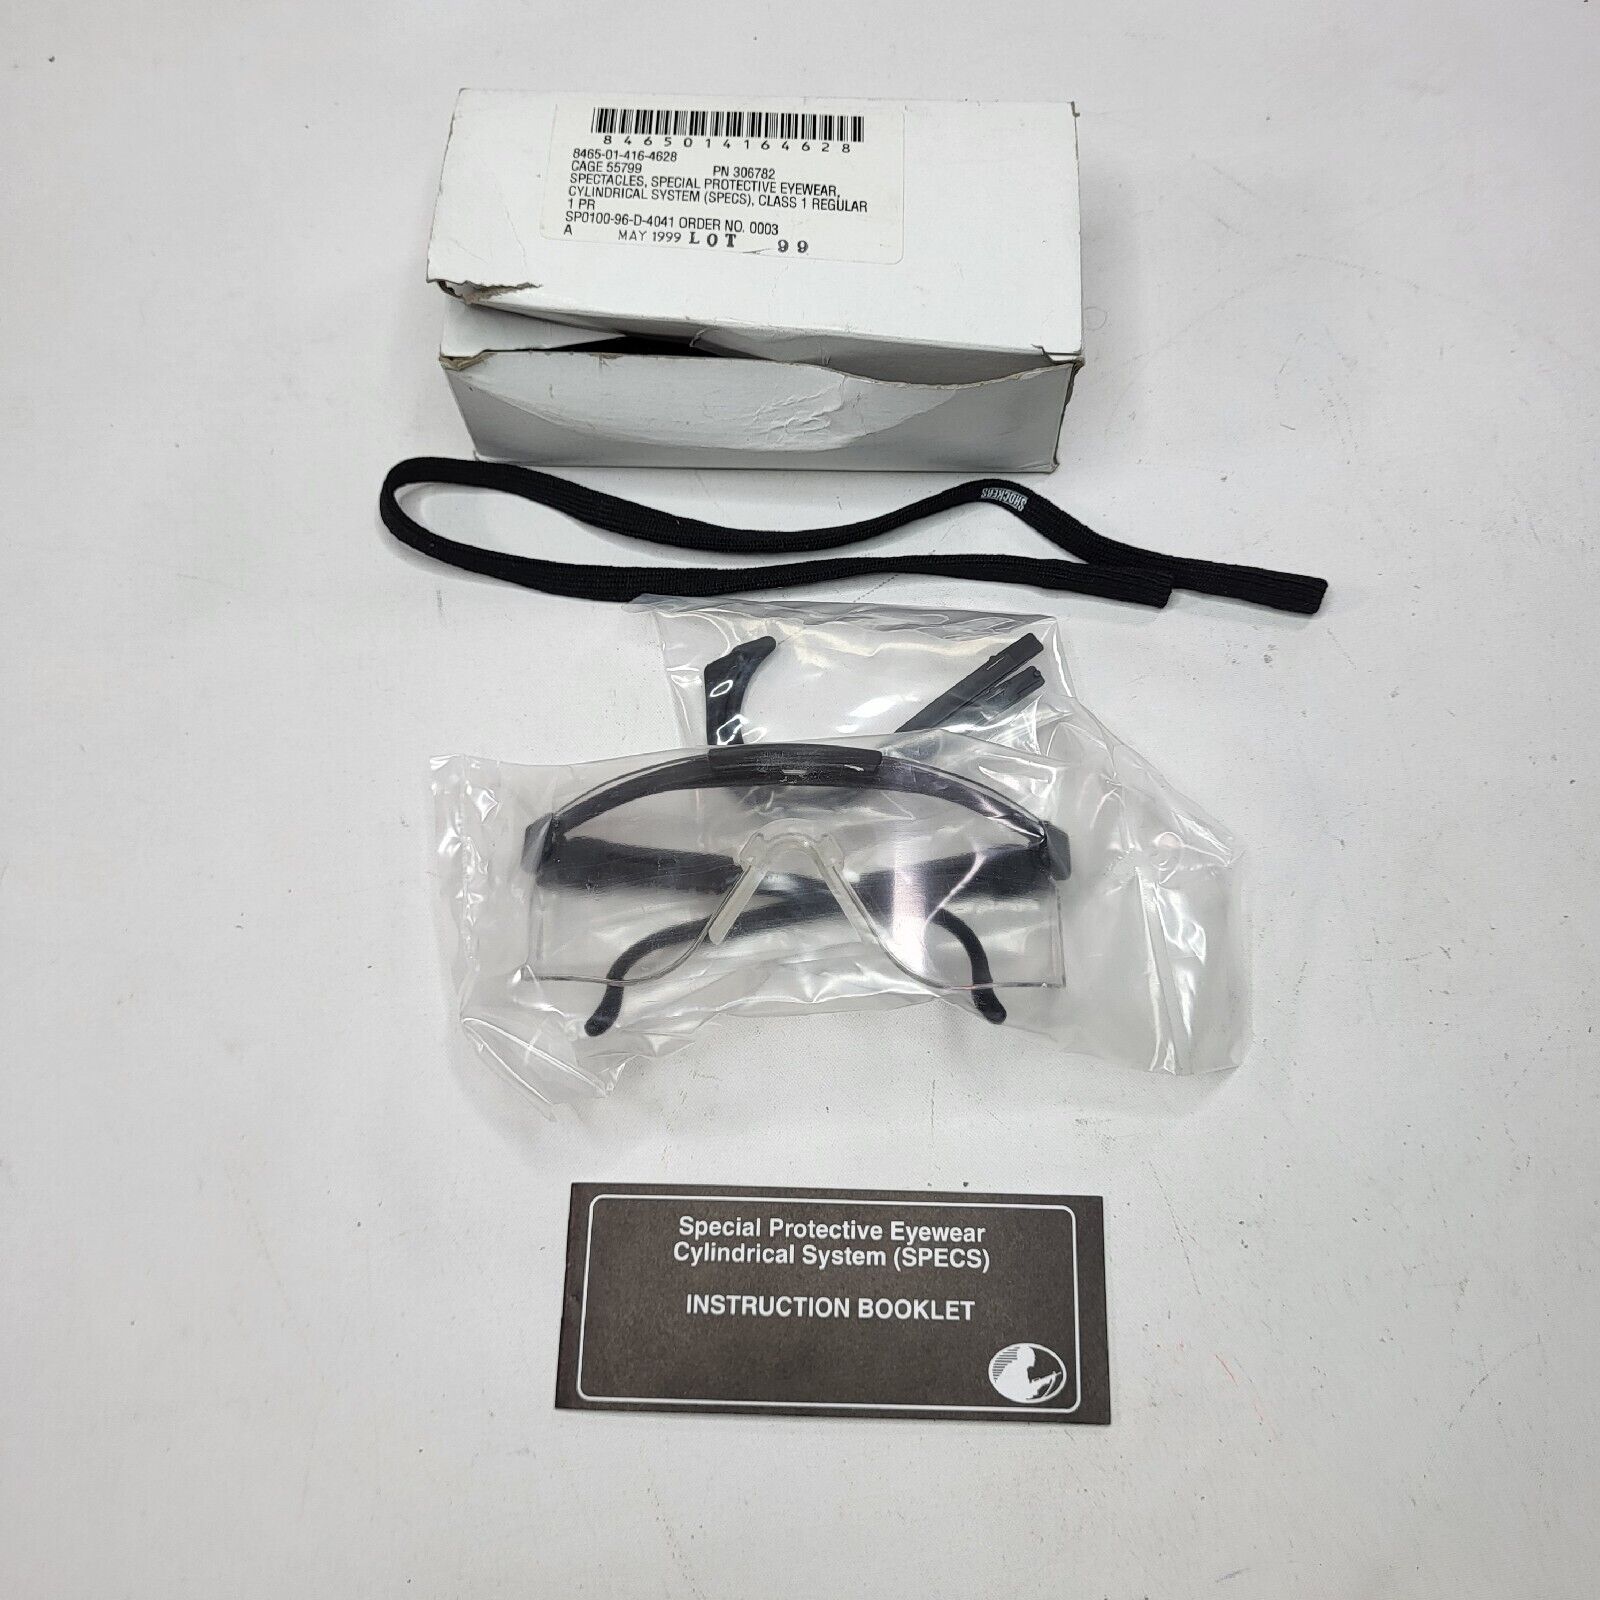 New Genuine Military Ballistic Safety Glasses SPECS Special Protective Eyewear